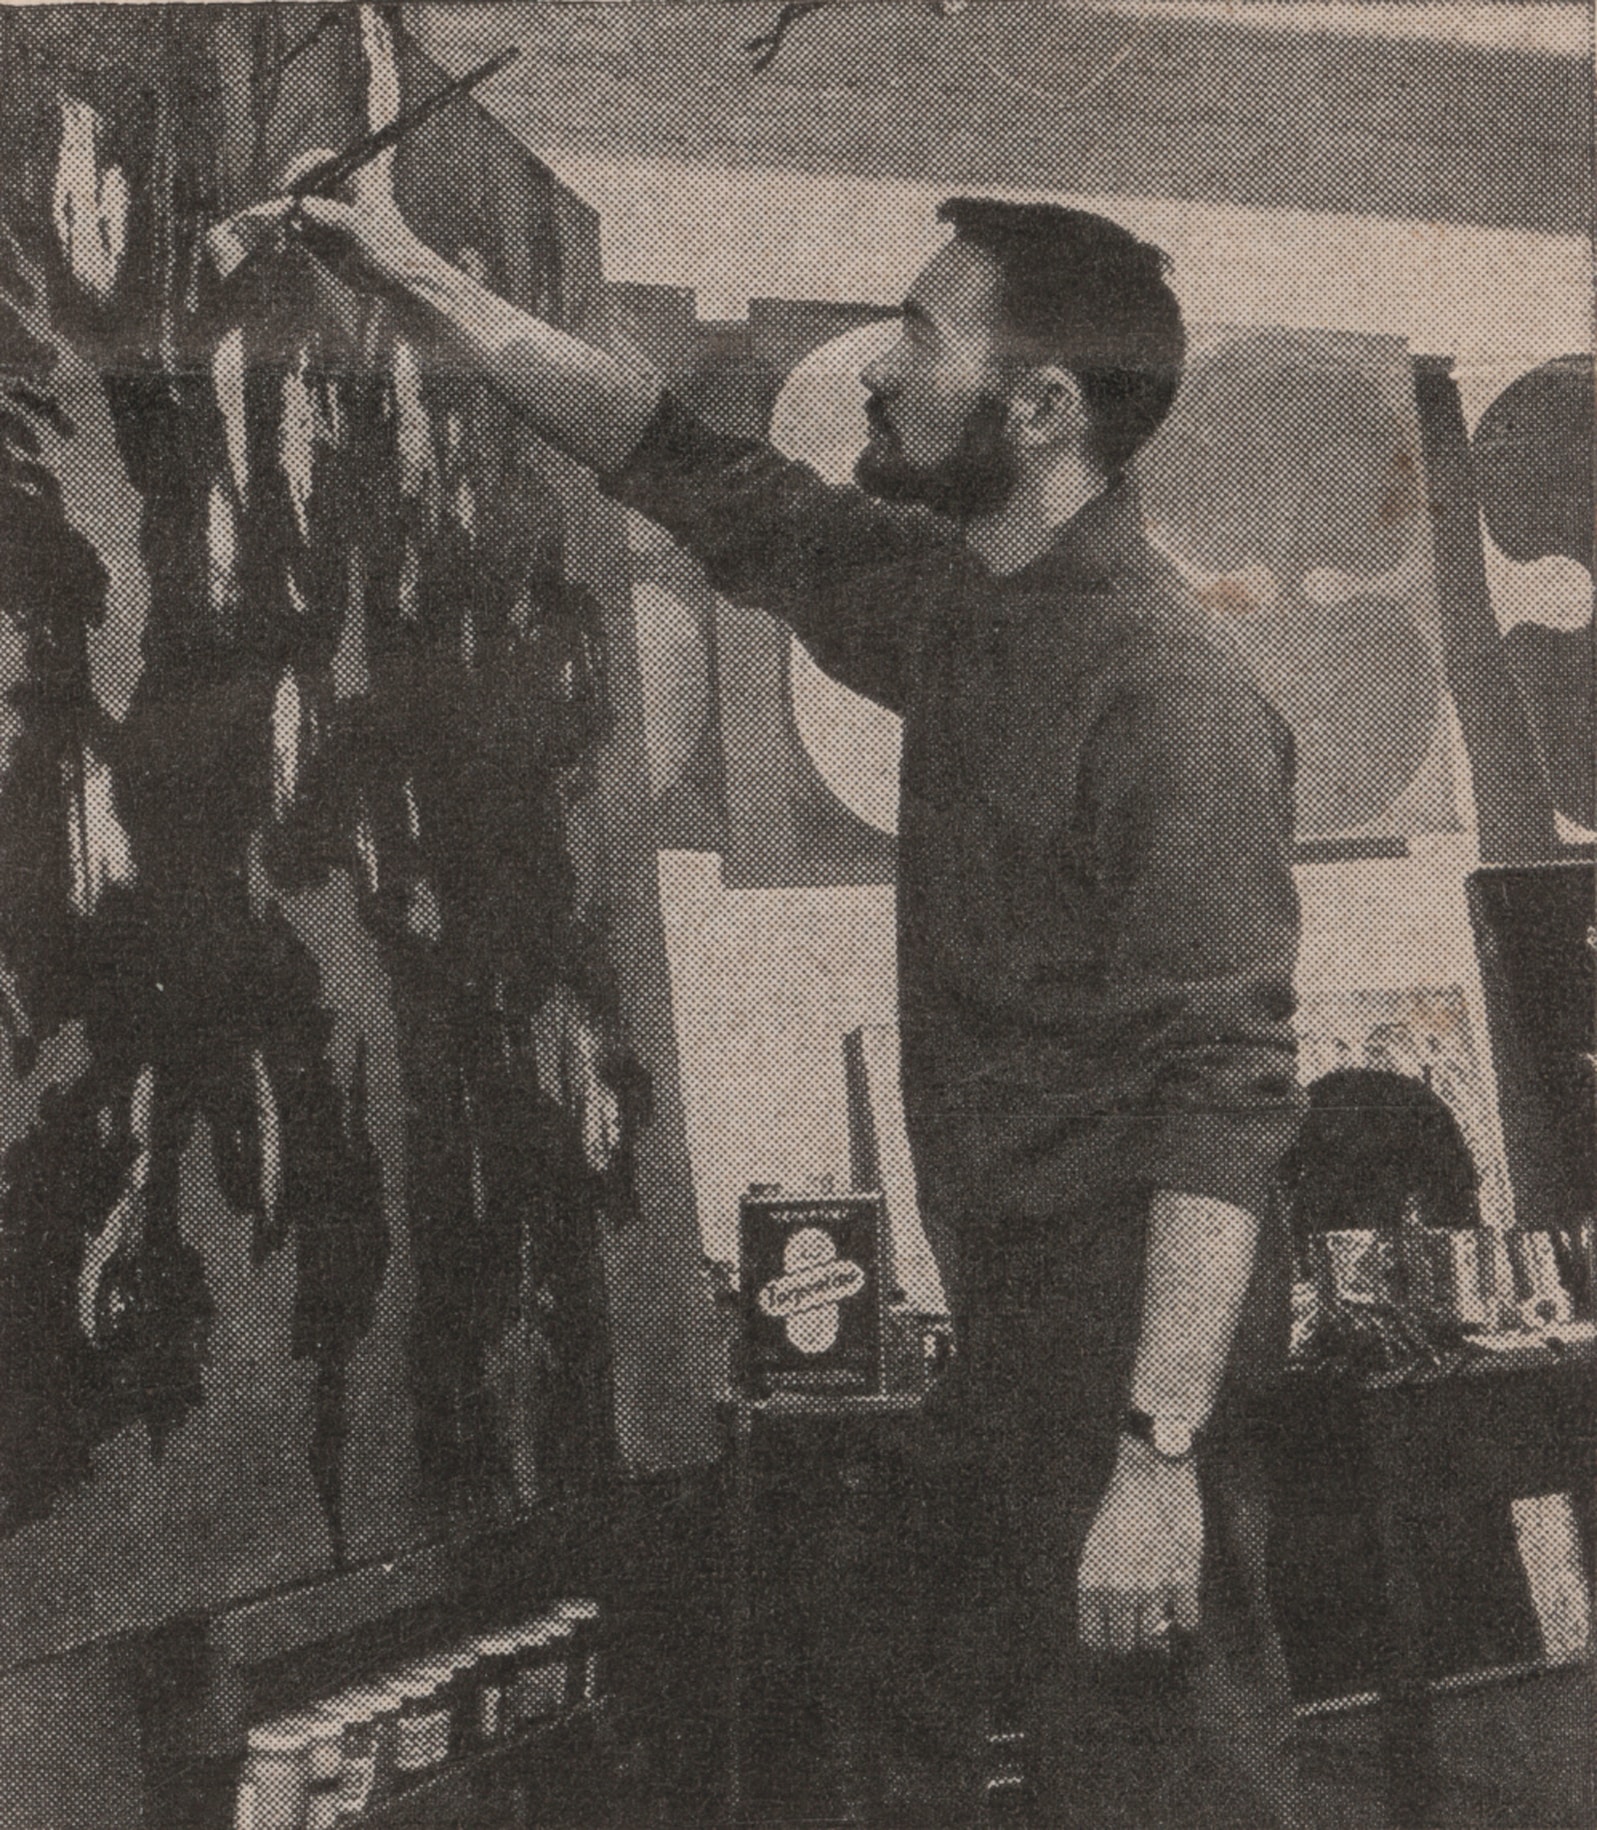 The artist, 1957, working&nbsp;on an abstract canvas; his early ginkgo works on paper are visible in the background, &nbsp;